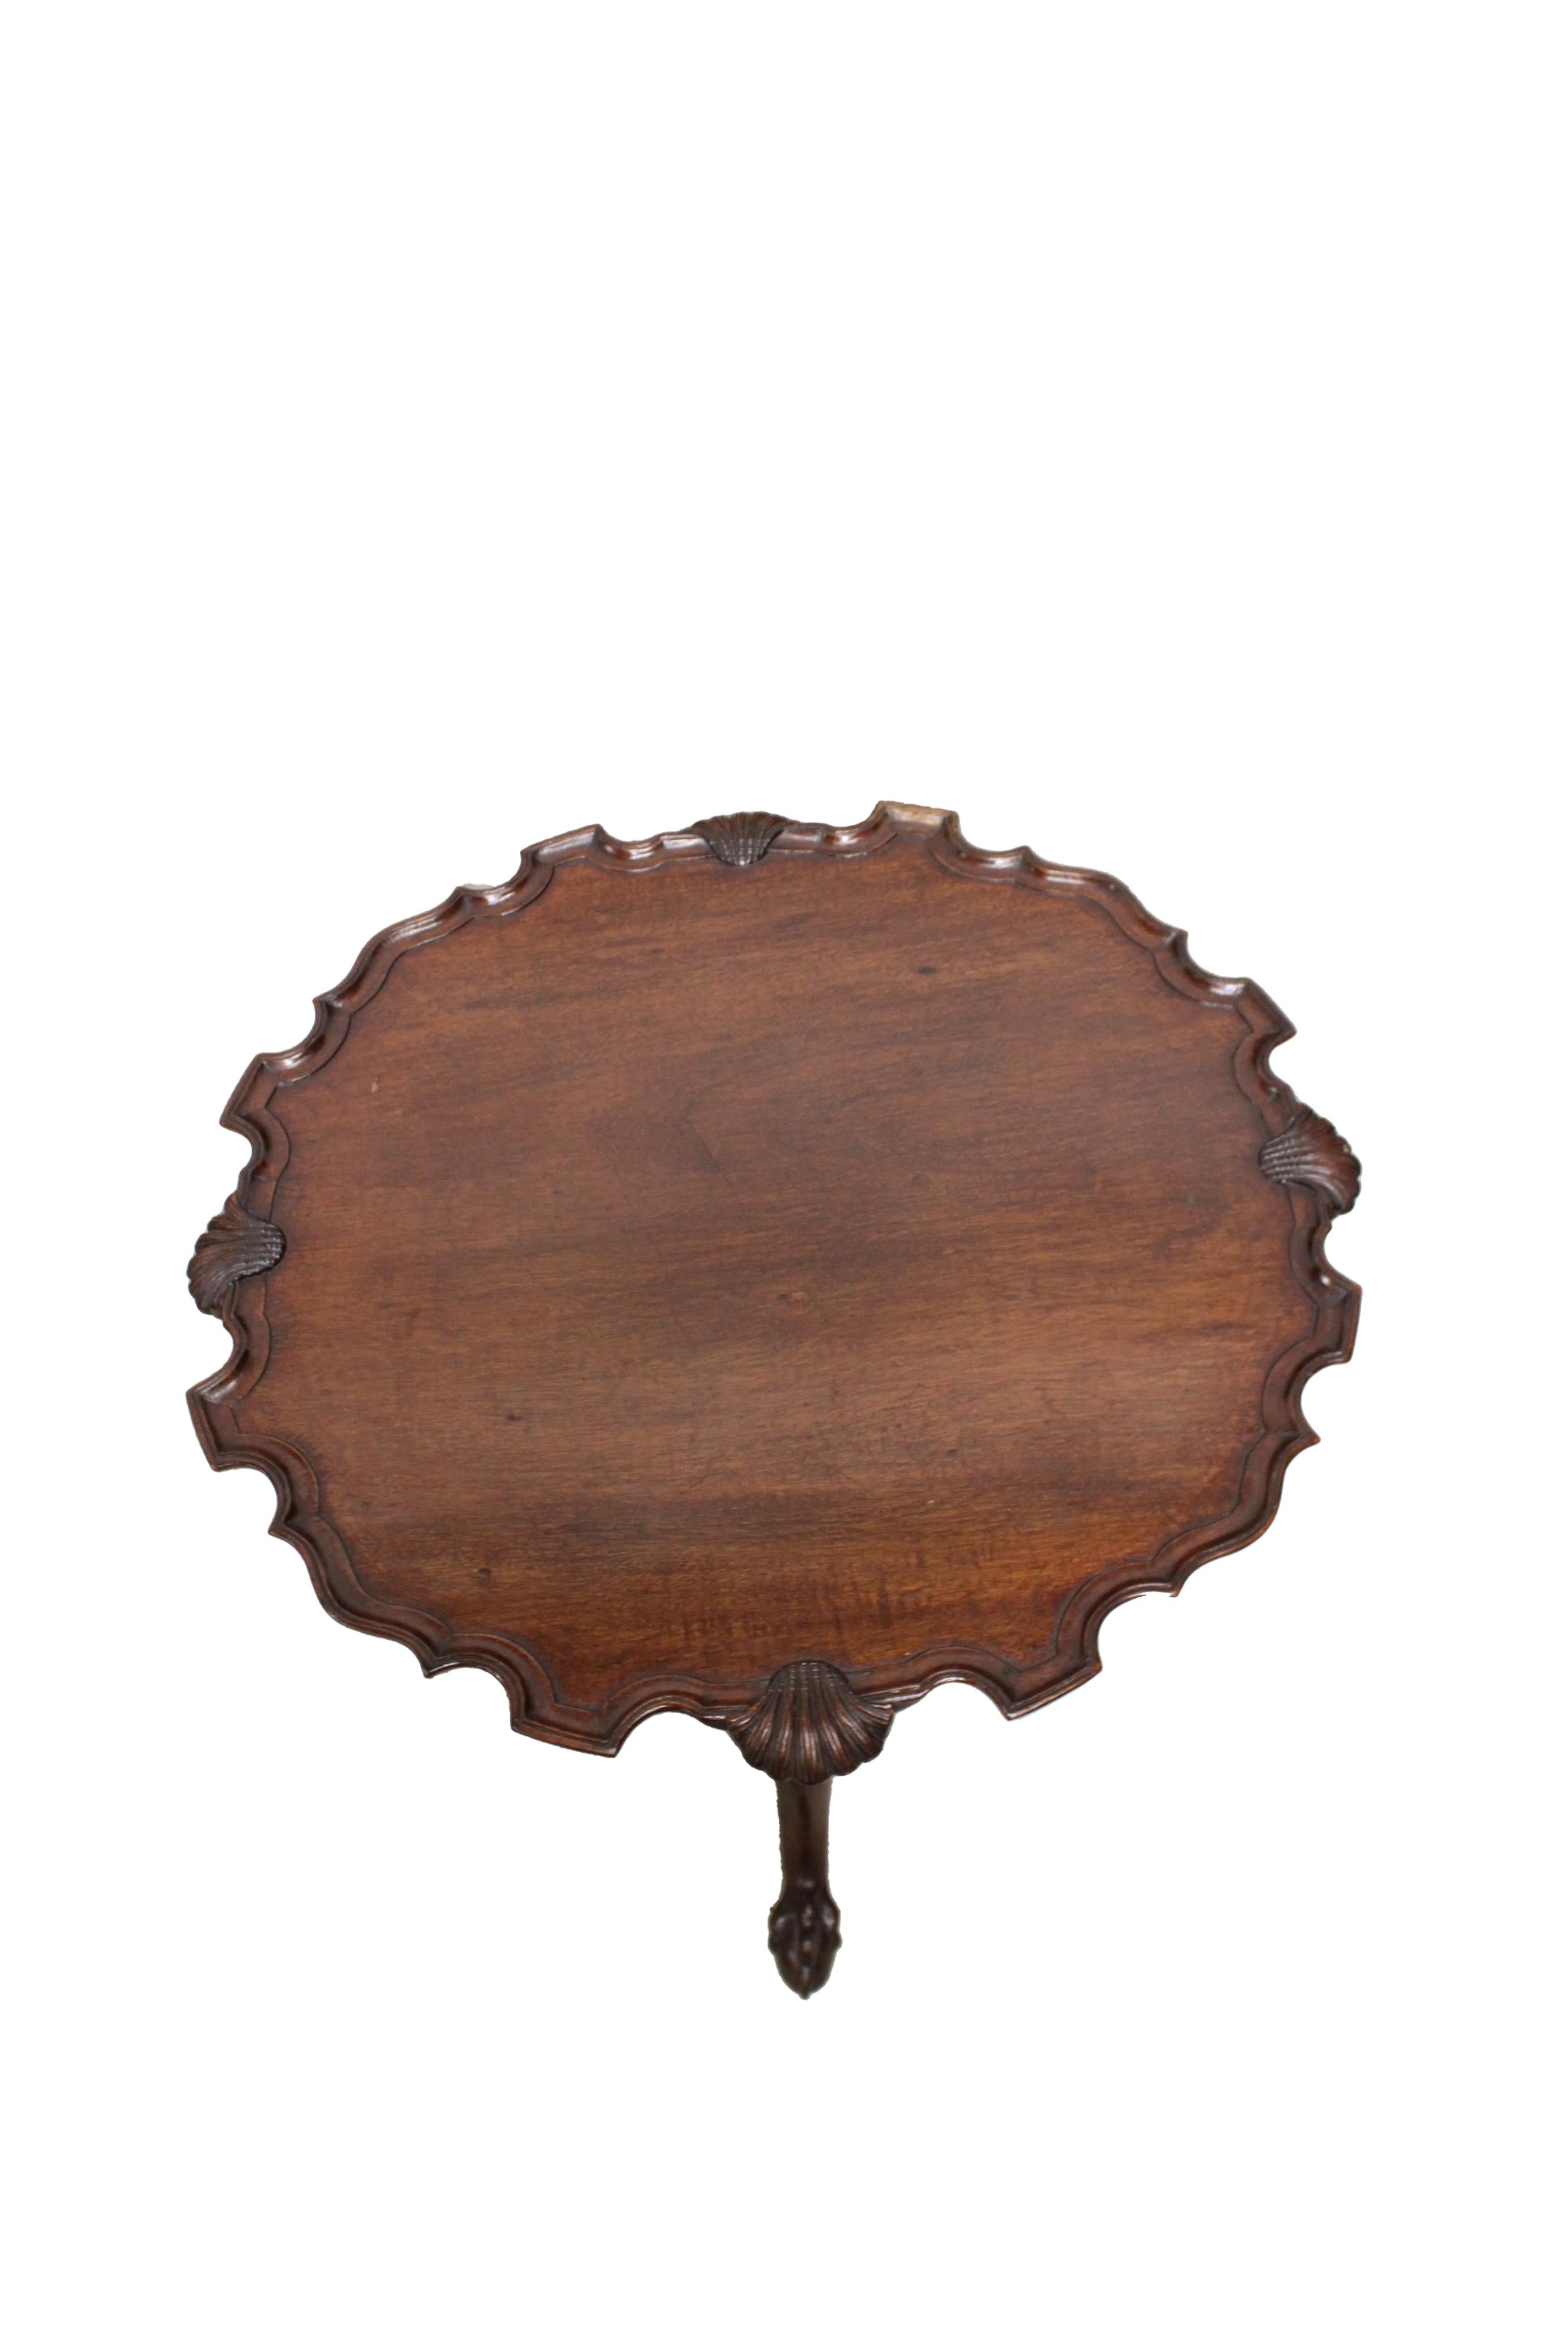 George II mahogany tilt-top tea table with beautiful shell carving and baluster support standing on three cabriole legs. Circa 1727-1760. Slight condensation damage.